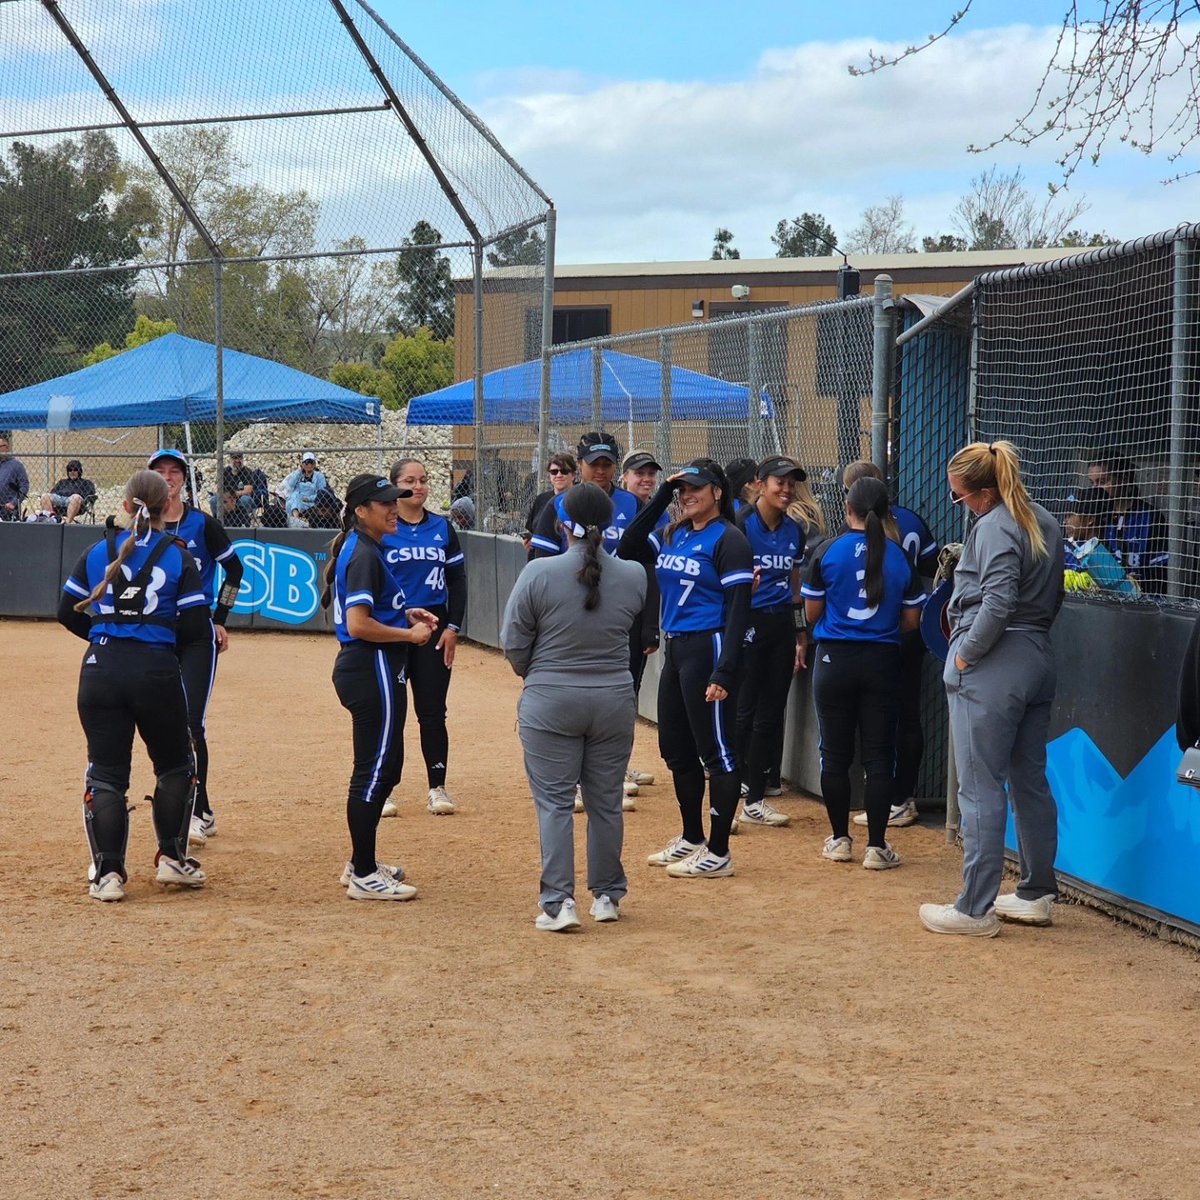 #PlayBall: This weekend, I was all too honored to join our @CSUSBNews Softball Team, who is ranked No.1 in the conference & fourth in the region to throw out the first pitch! #Thanks, let's play ball! #RelationalPolicing